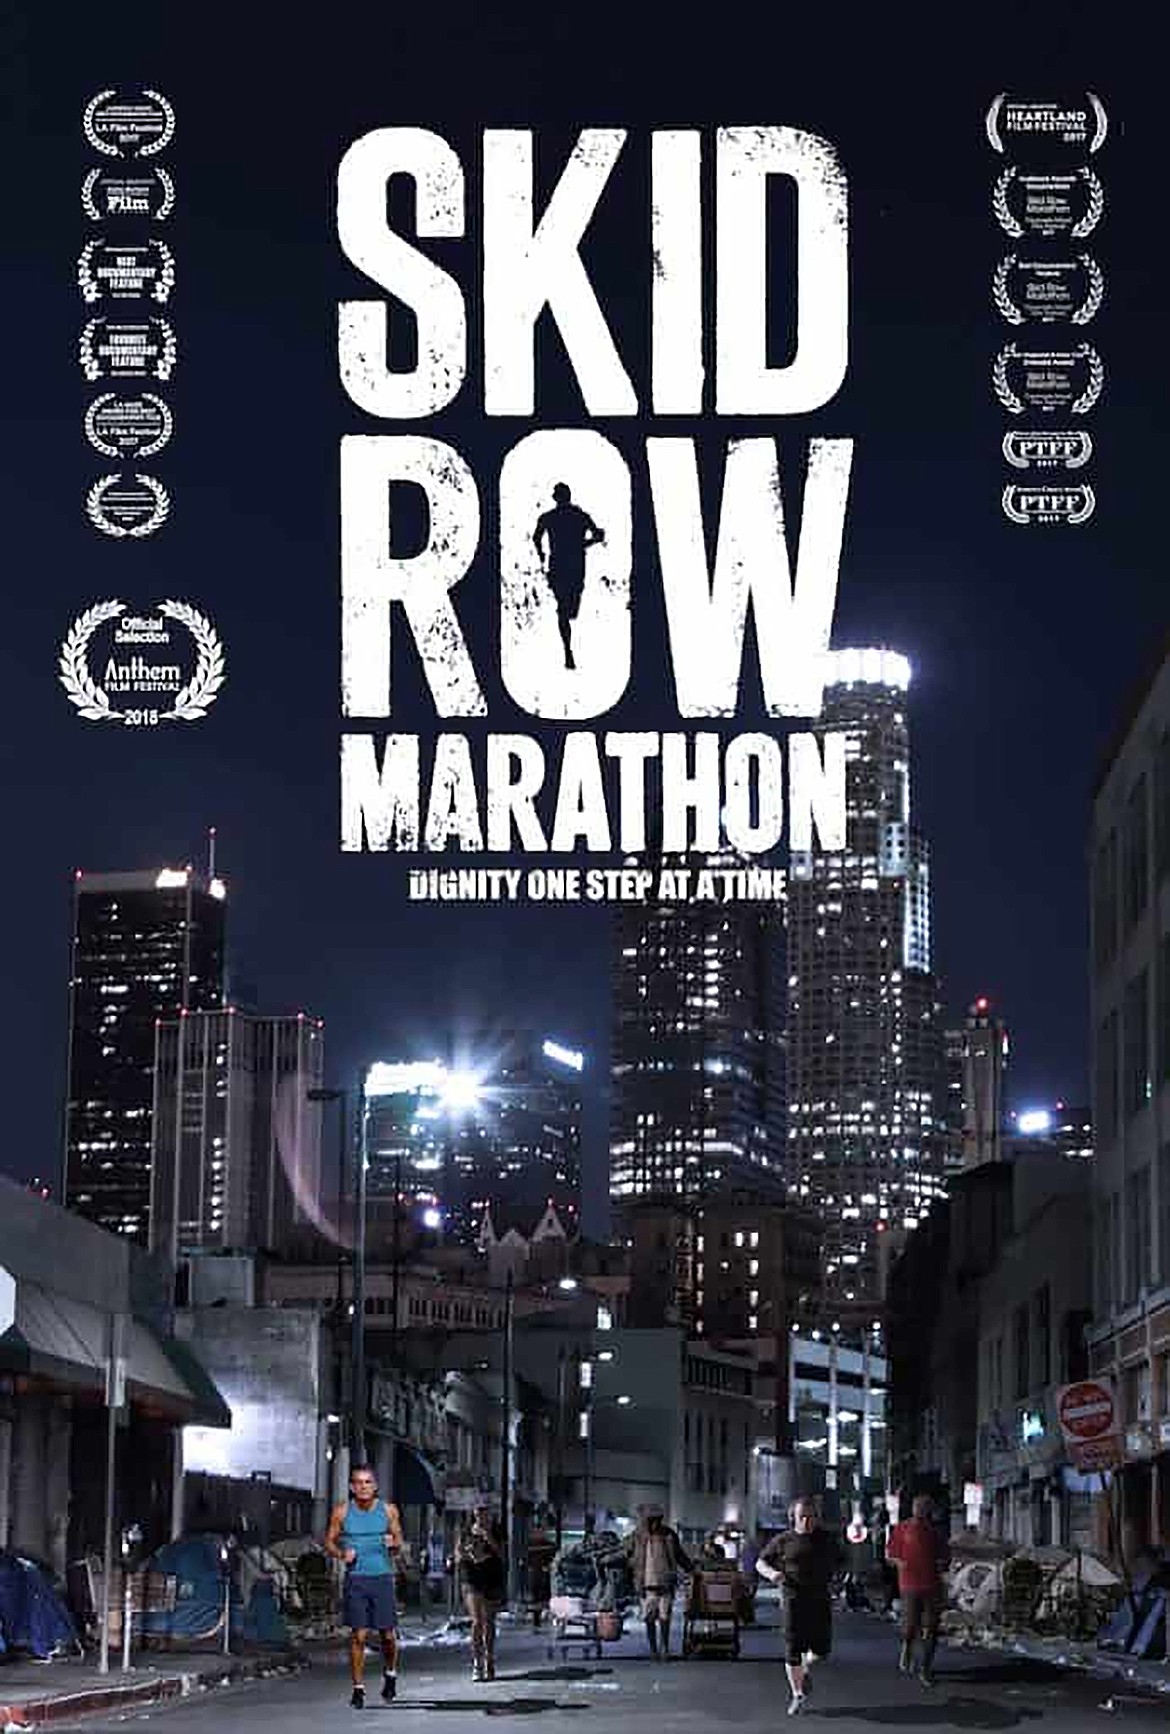 “Skid Row Marathon”, an uplifting documentary that tells the inspiring story of how a criminal judge started a running club on L.A.’s skid row, will be shown during the upcoming Sandpoint Film Festival.